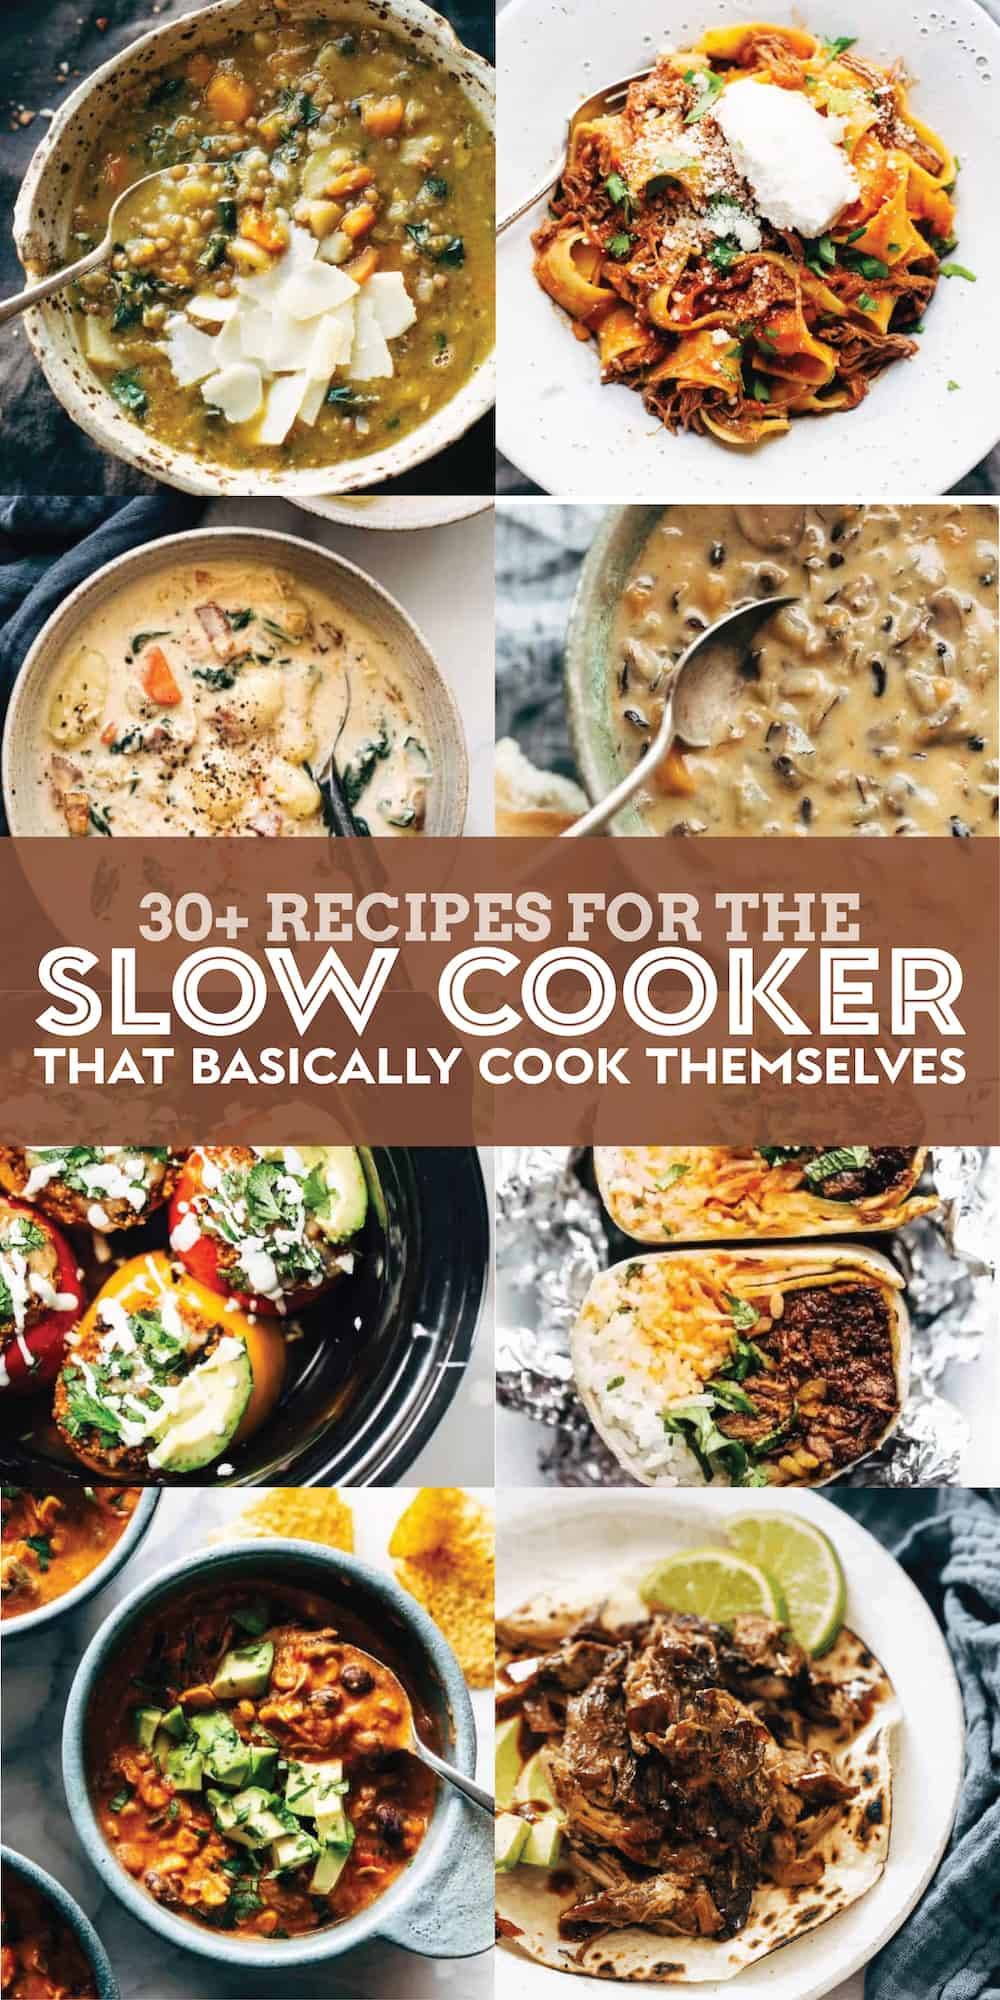 Slow Cooker Recipes - Pinch of Yum